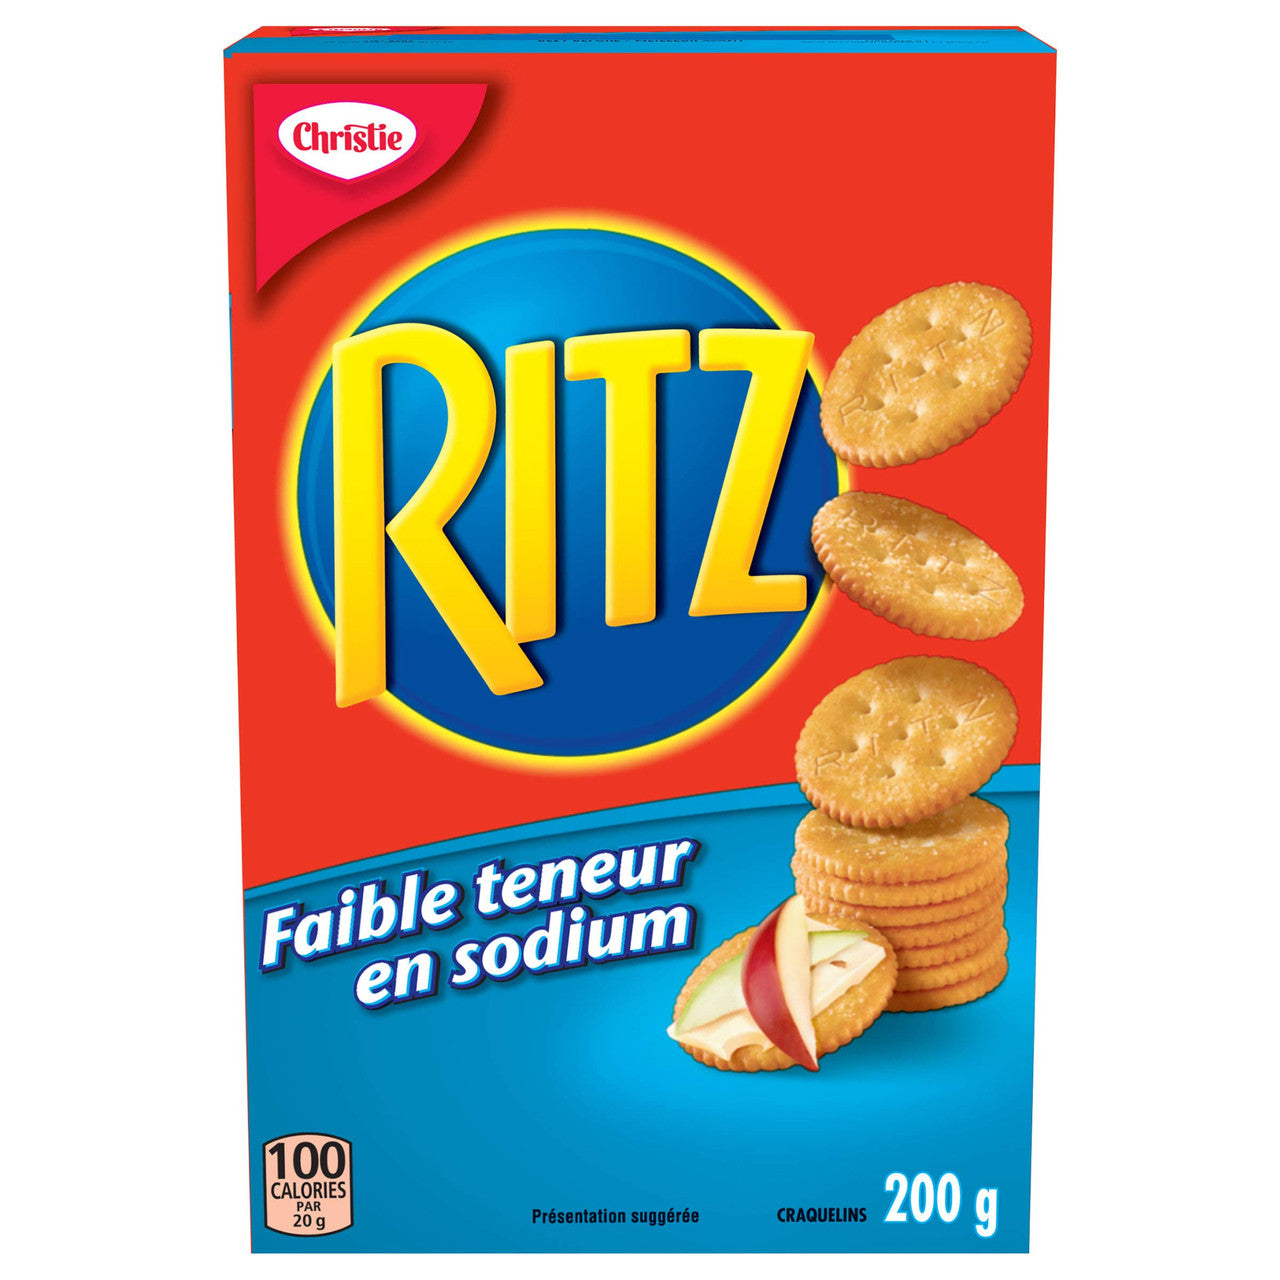 Ritz Low Sodium Crackers, 200g/7oz. (Imported from Canada)